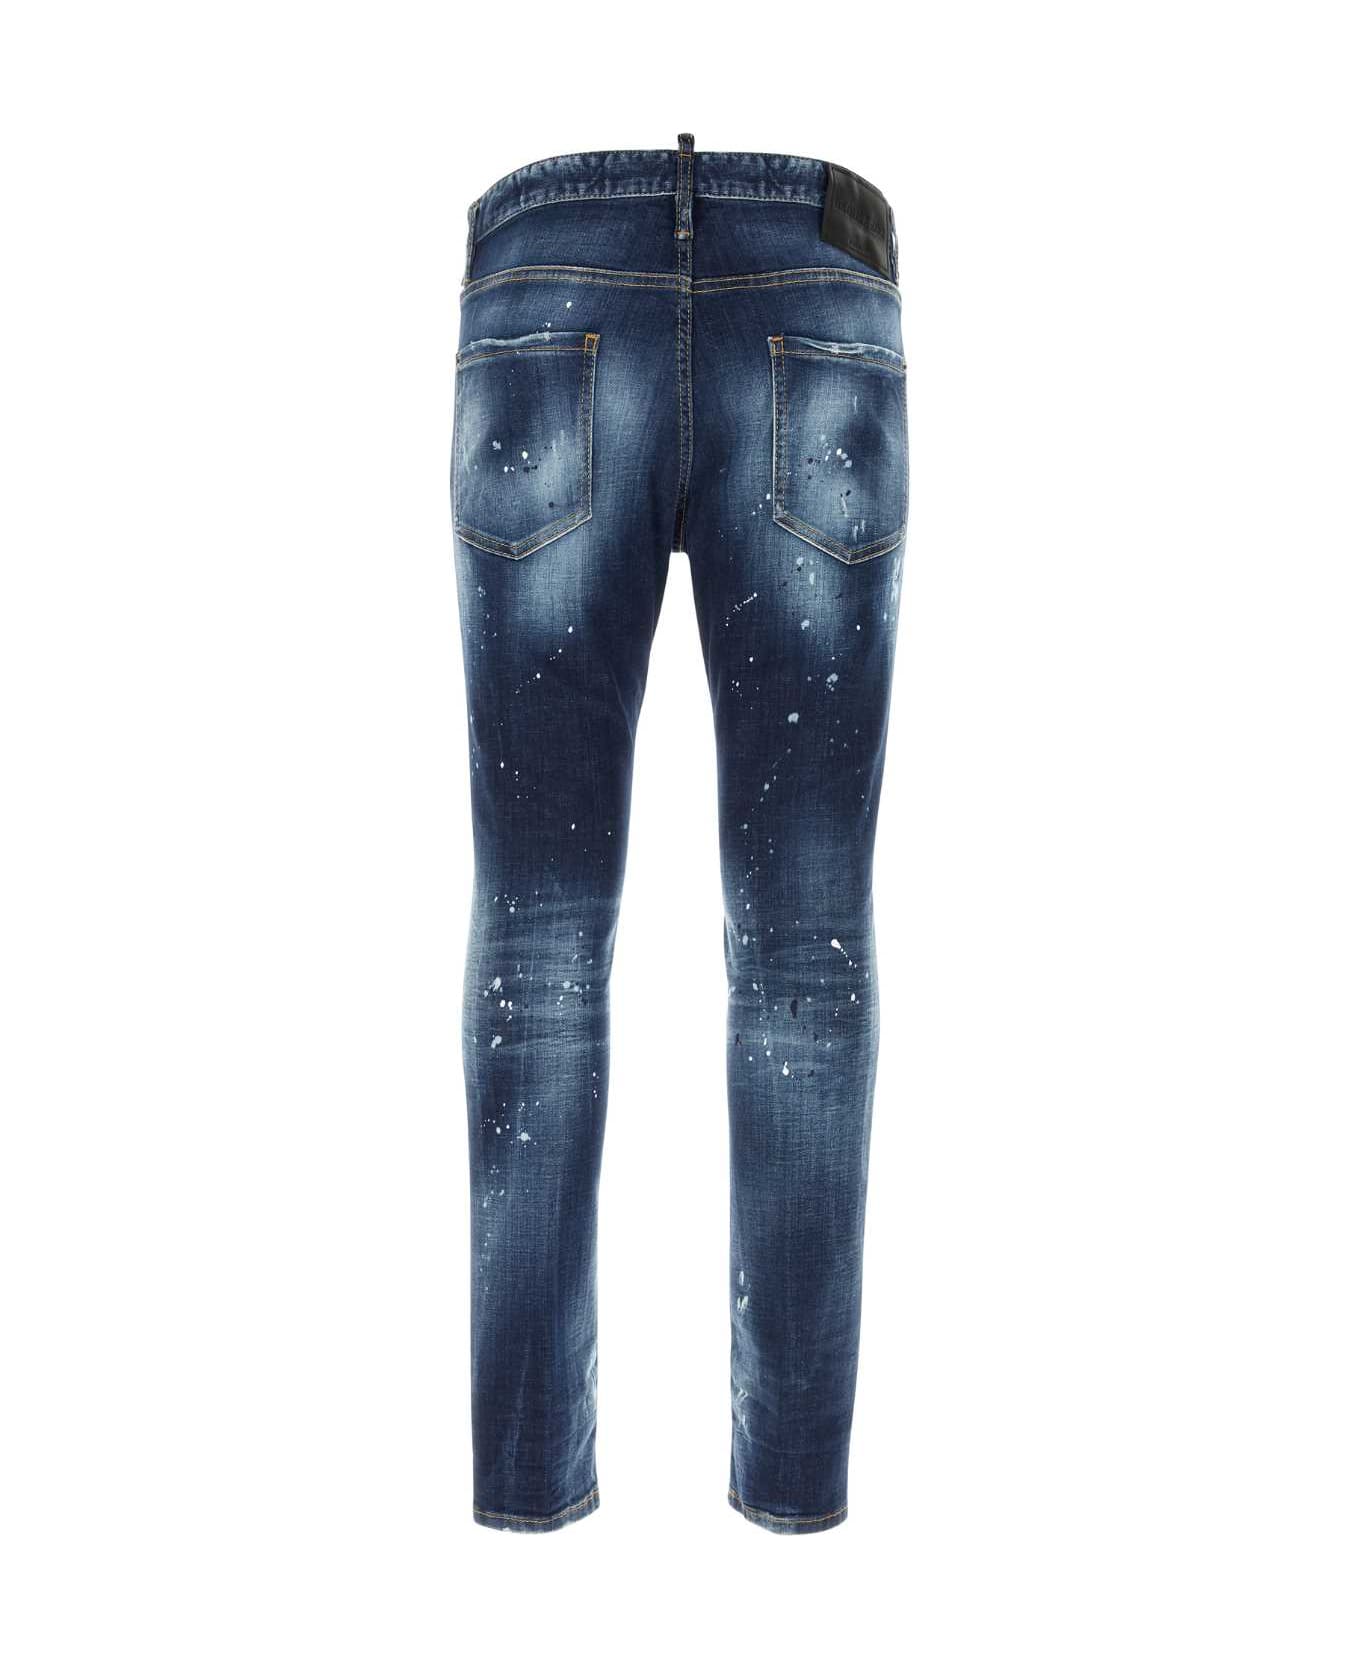 Dsquared2 Stretch Denim Cool Guy Jeans - NAVYBLUE